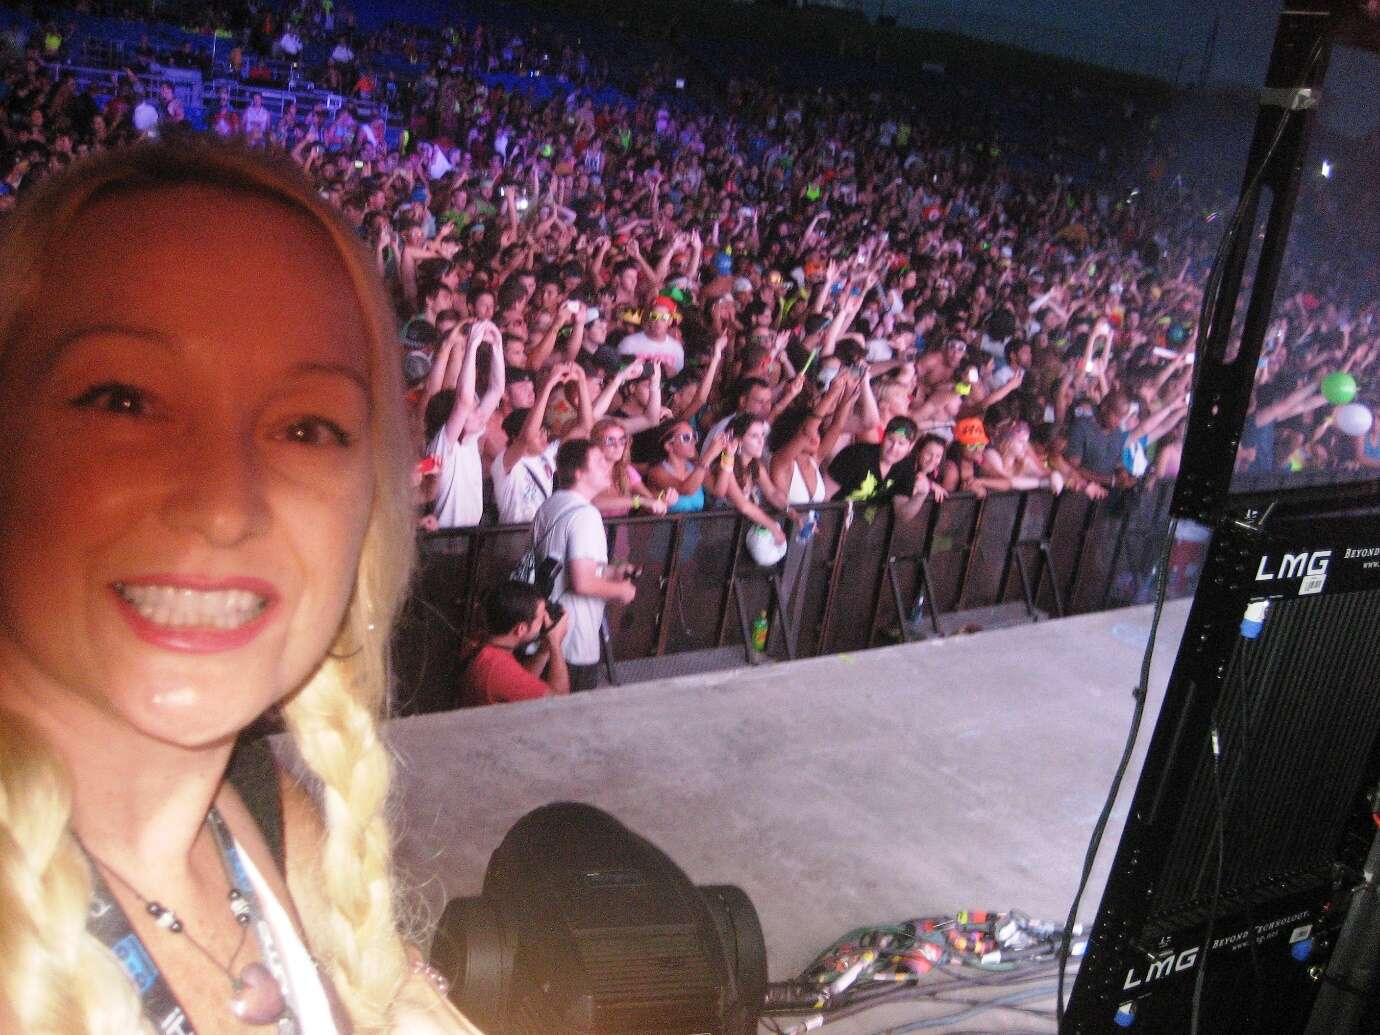 A person taking a selfie in front of a large crowd Description automatically generated